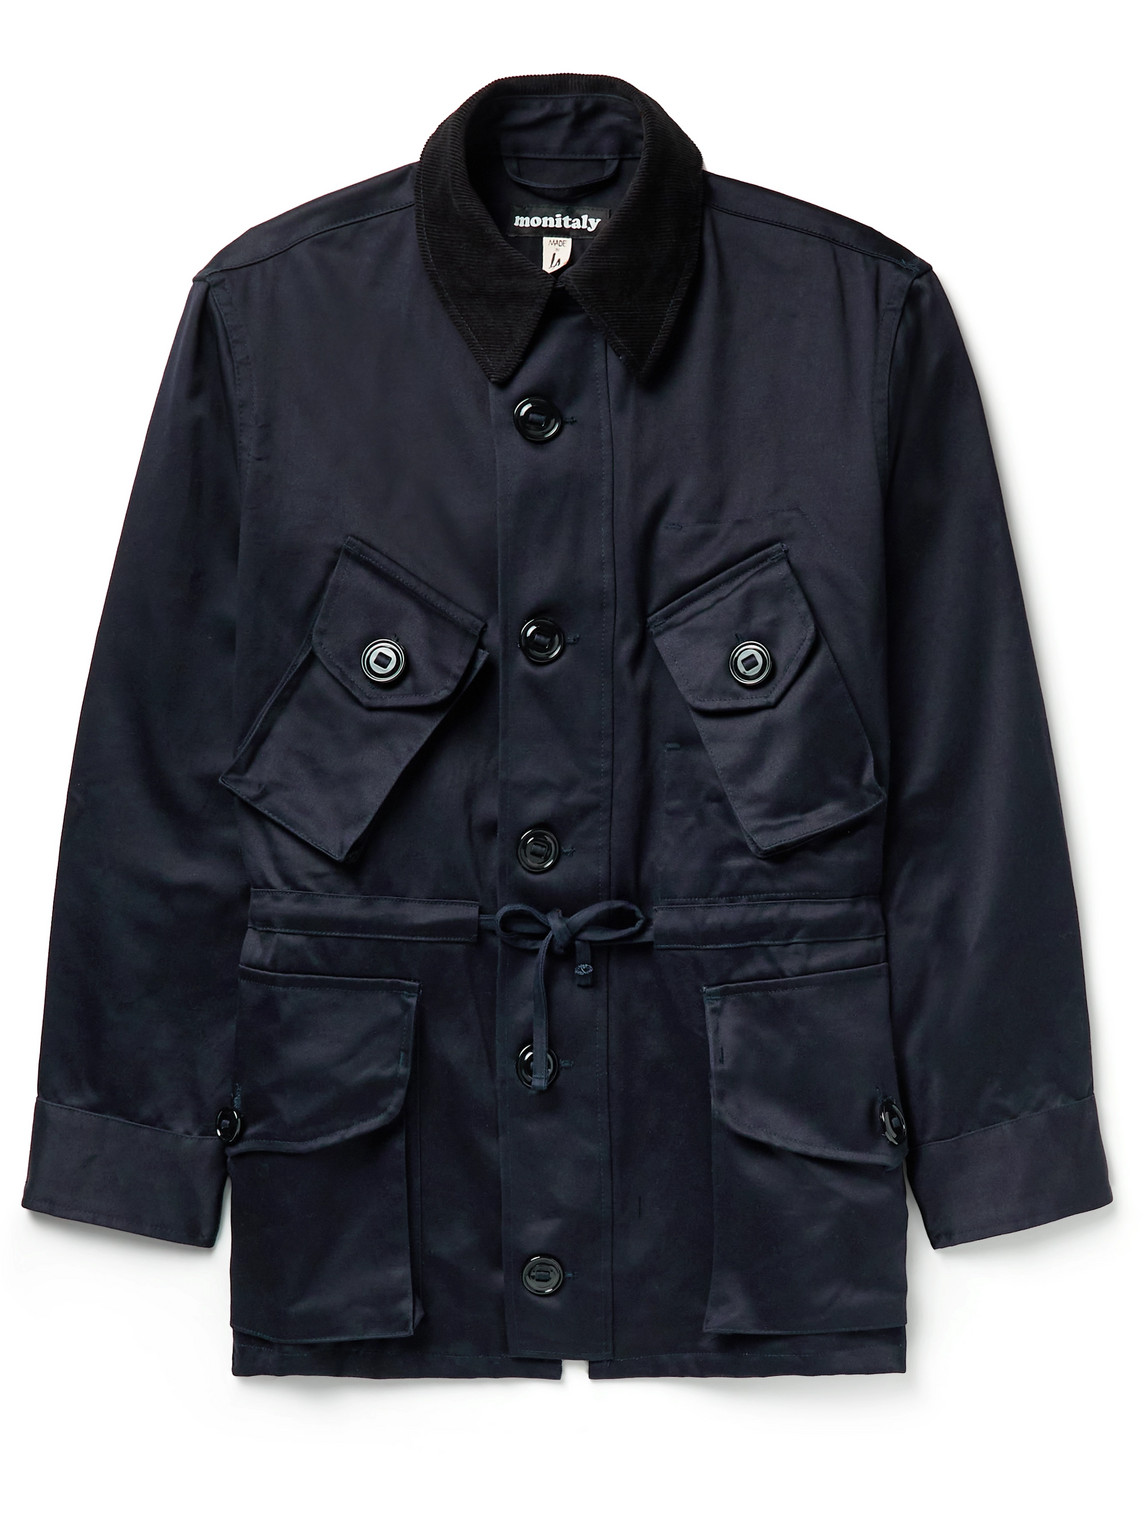 Throwing Fits Type B Corduroy-Trimmed Cotton-Sateen Jacket